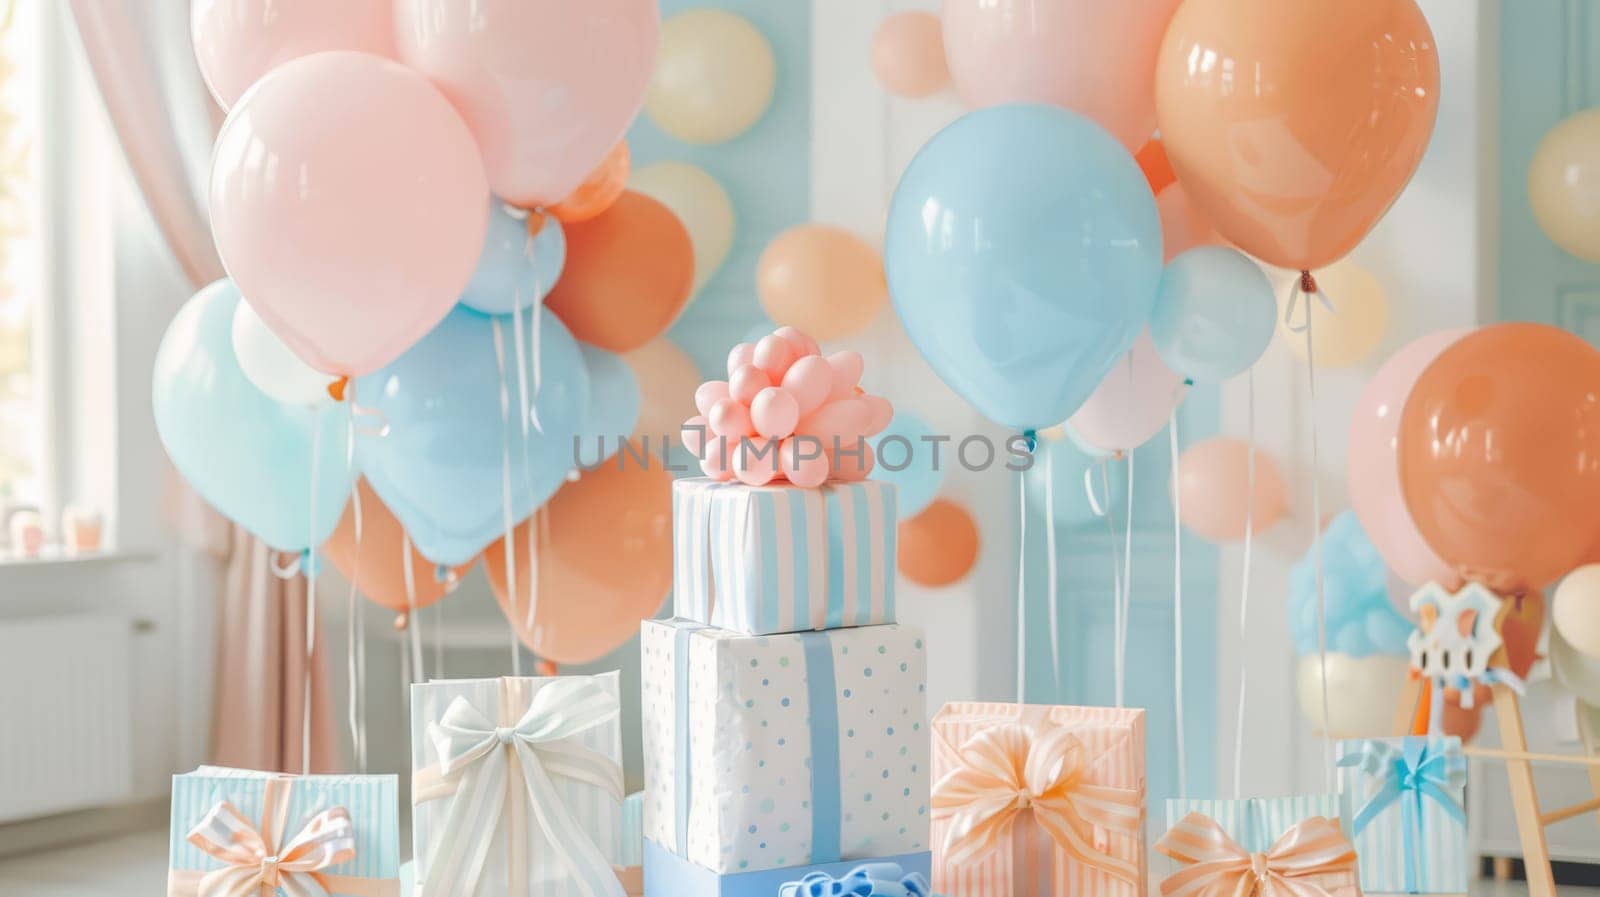 Balloons and bags with gifts for the organizer of a children party by natali_brill